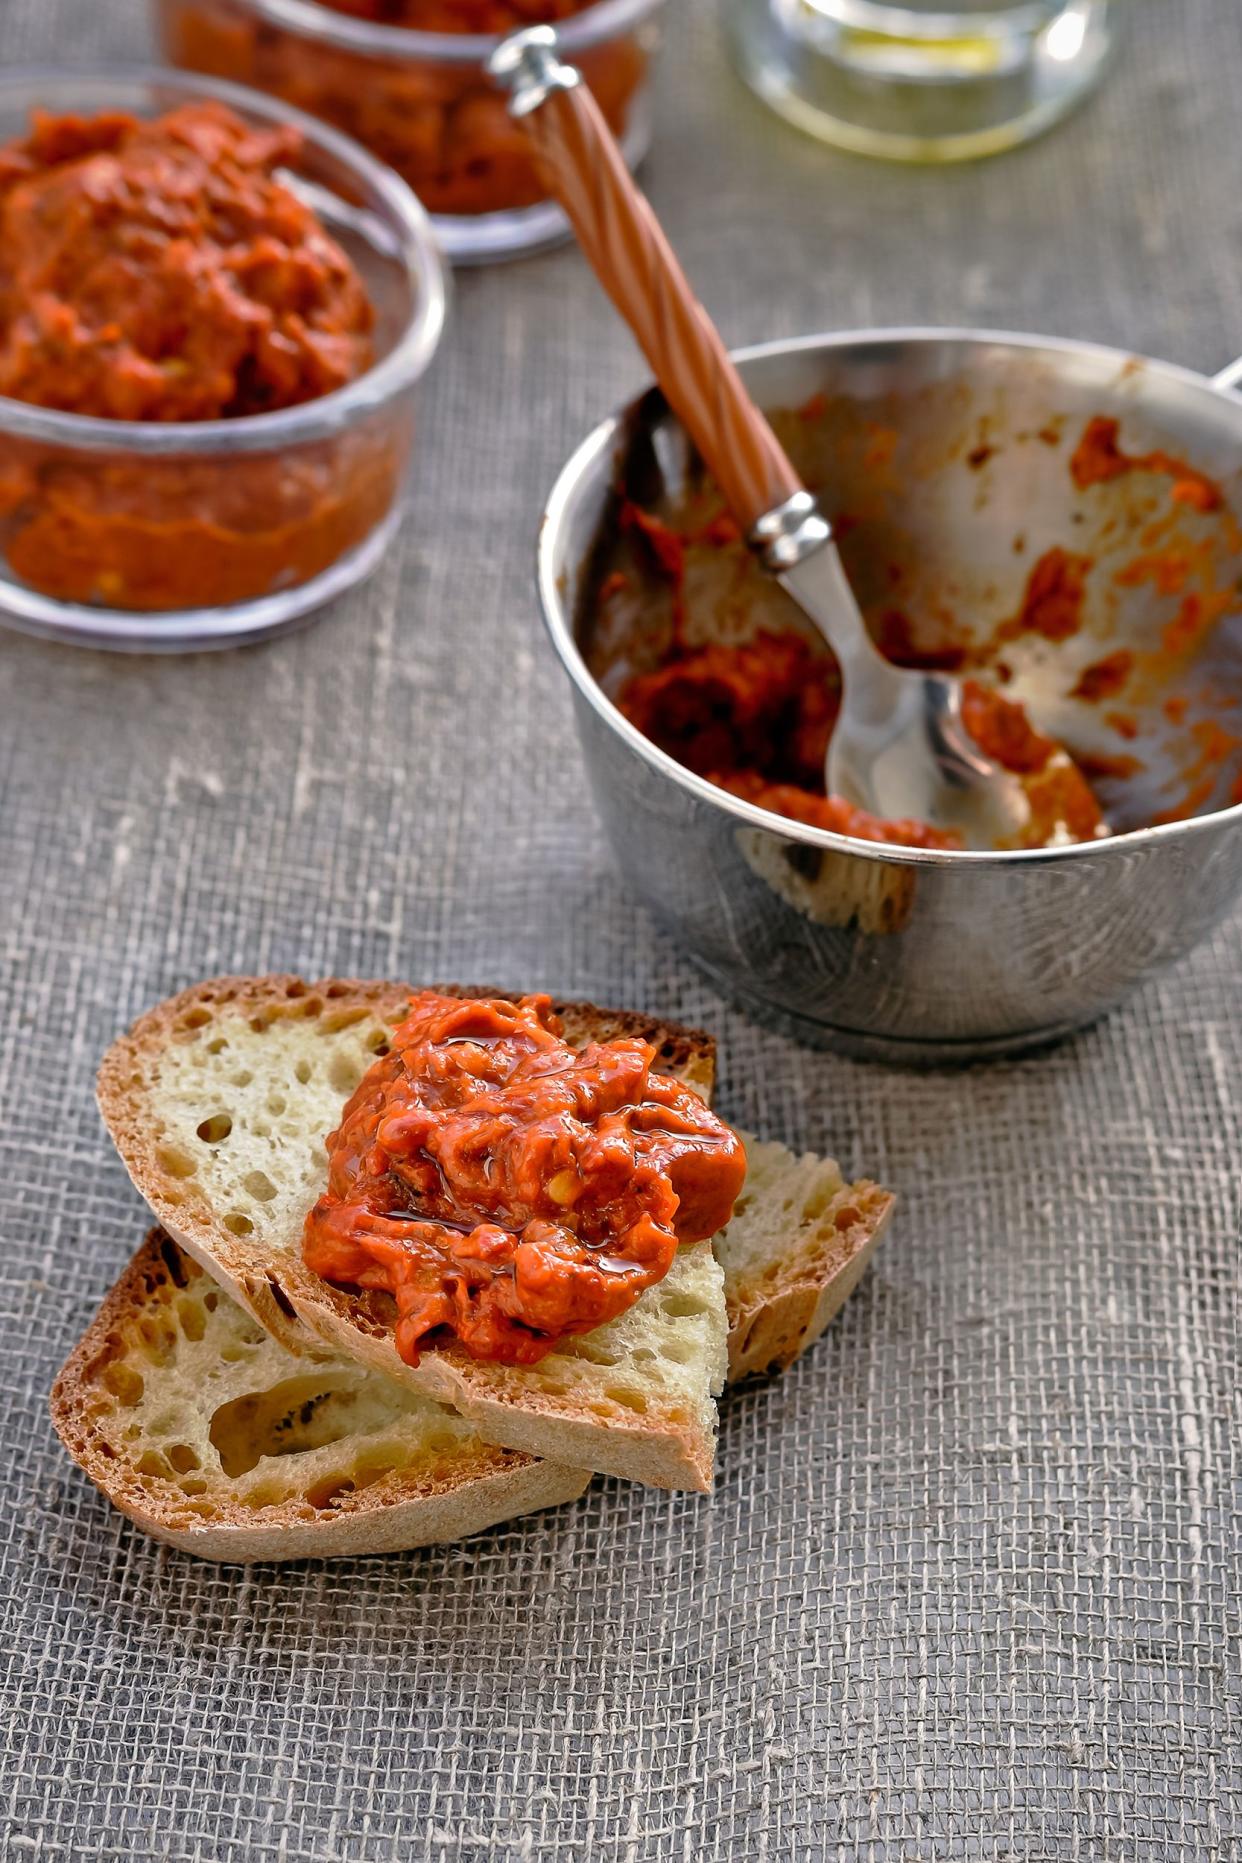 Red pepper relish on a piece of bread with relish in a stainless steel bowl with a spoon with relish in two glass round bowls